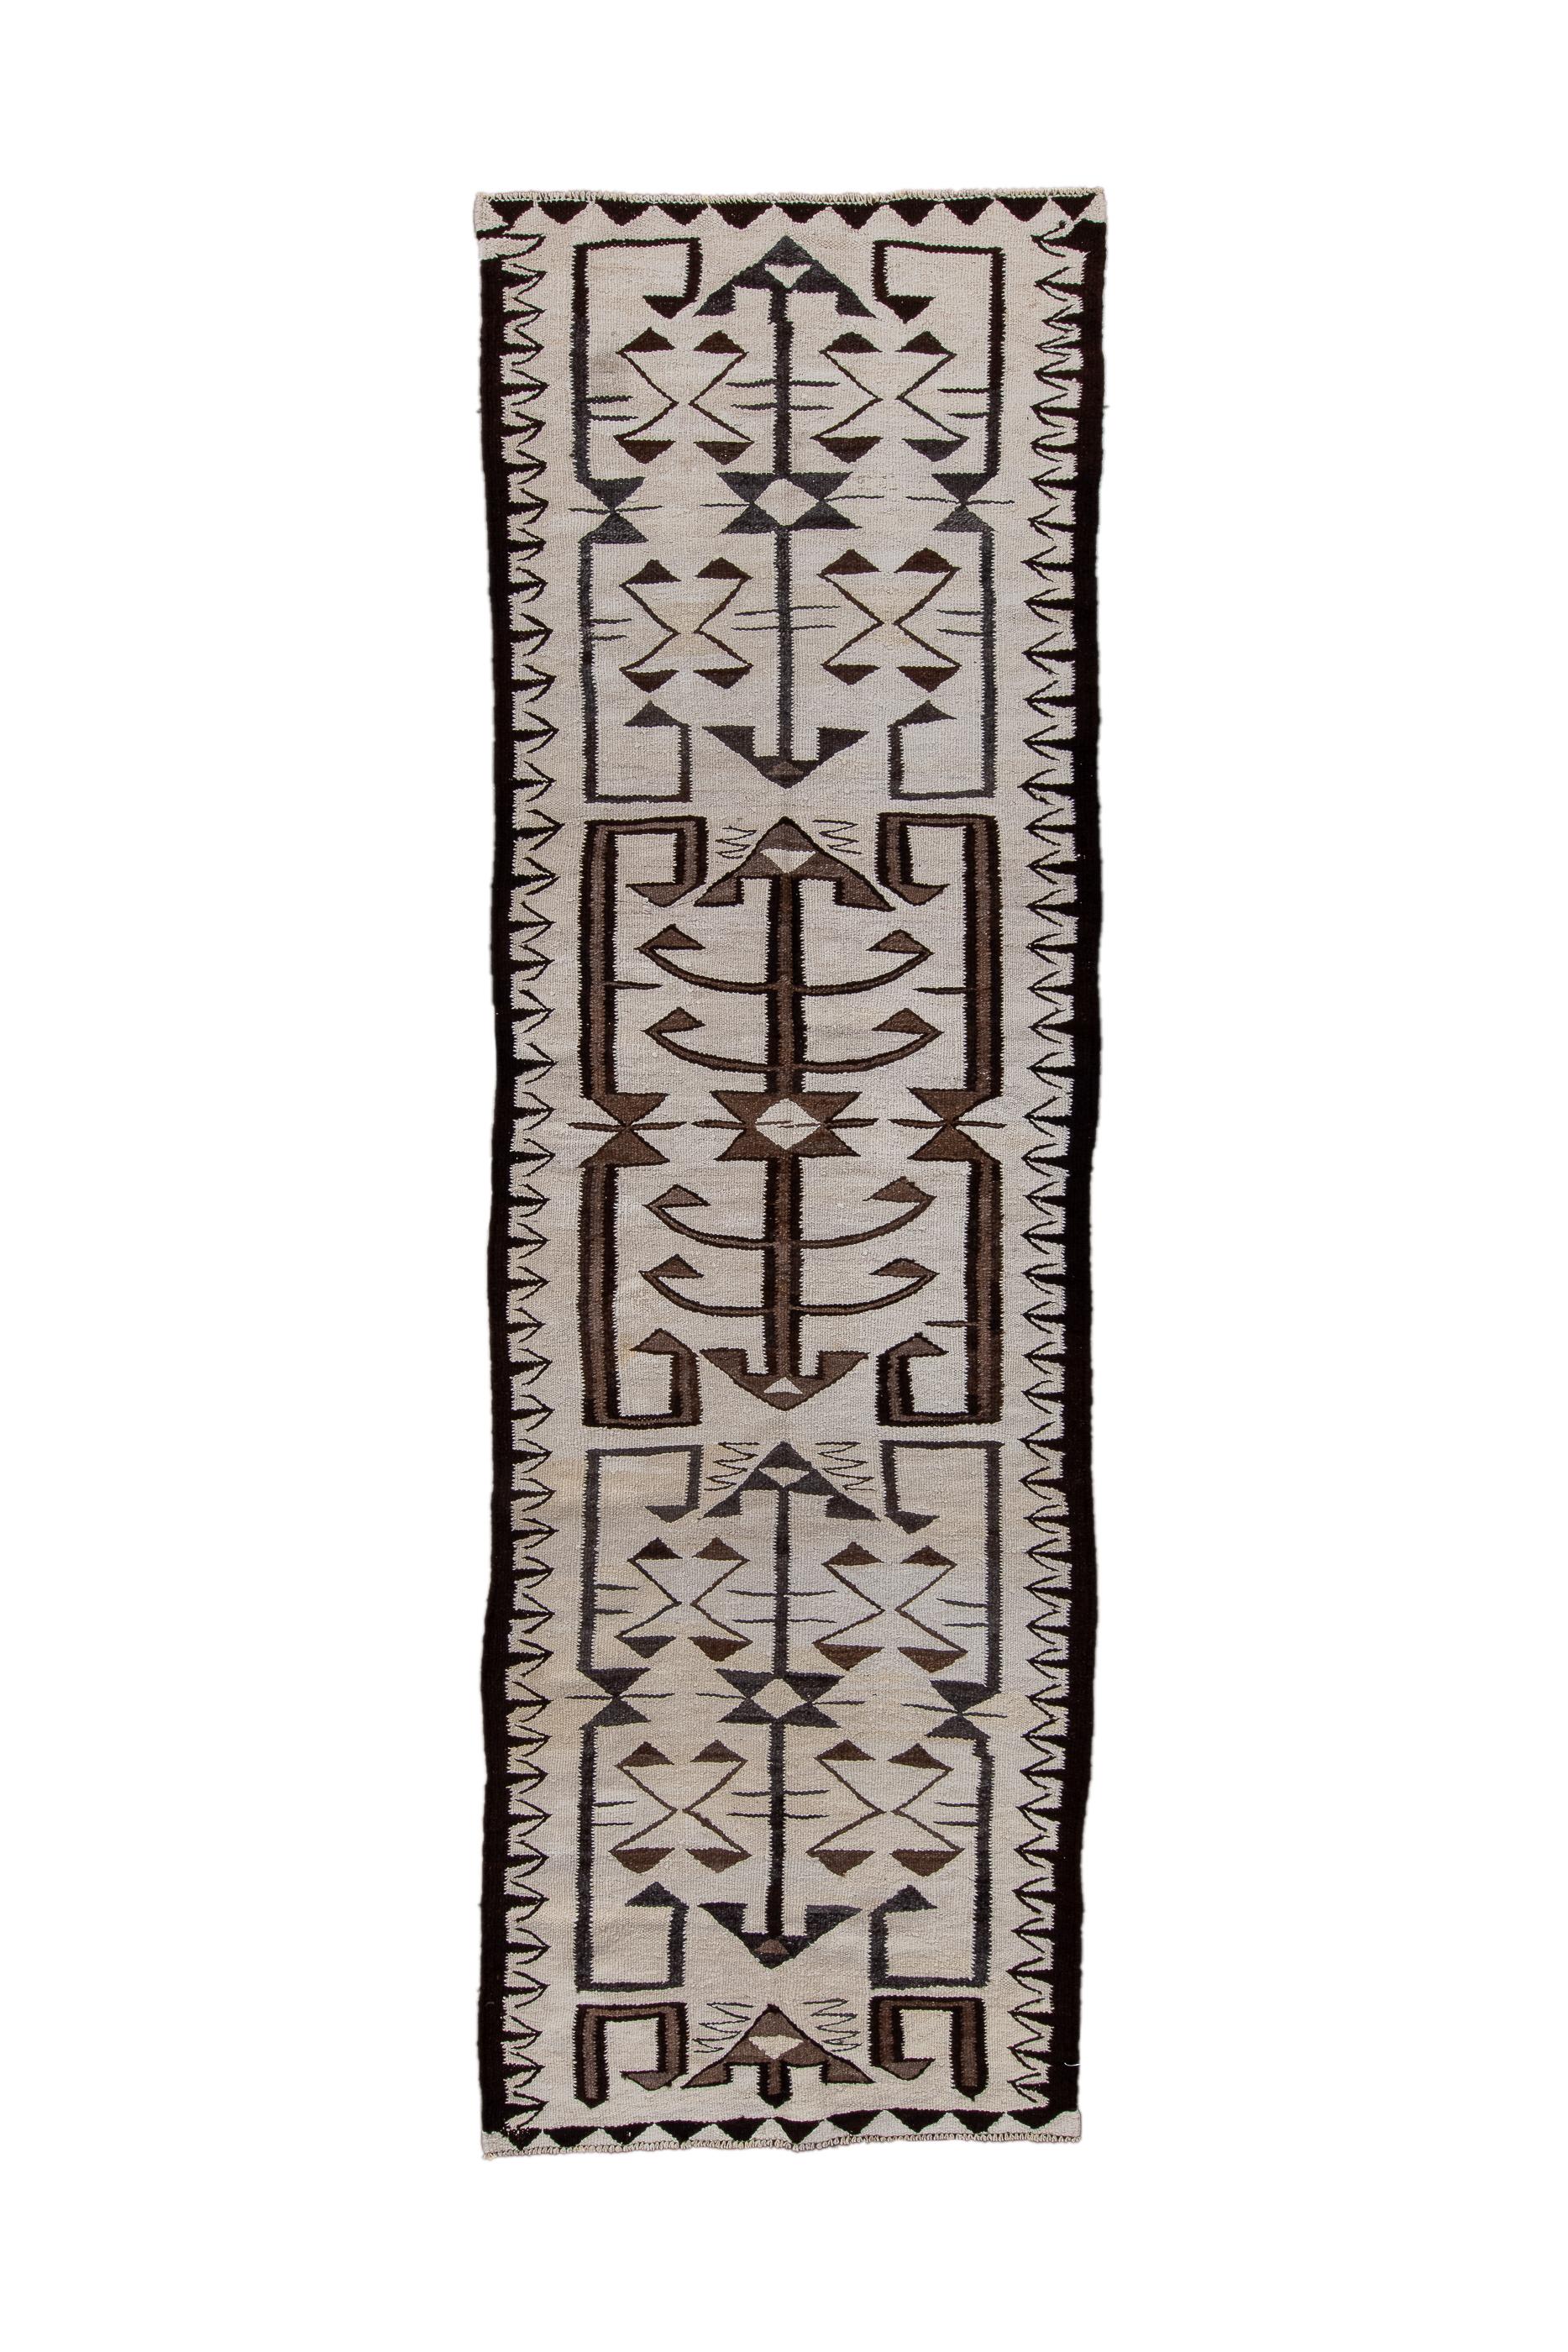 The ecru beige field of this tapestry woven pileless runner shows a pattern akin to that of Turkmen tent bands, also on light grounds. There is a tripartite layout with central poles bracketed by four straight and end curled shapes. The central